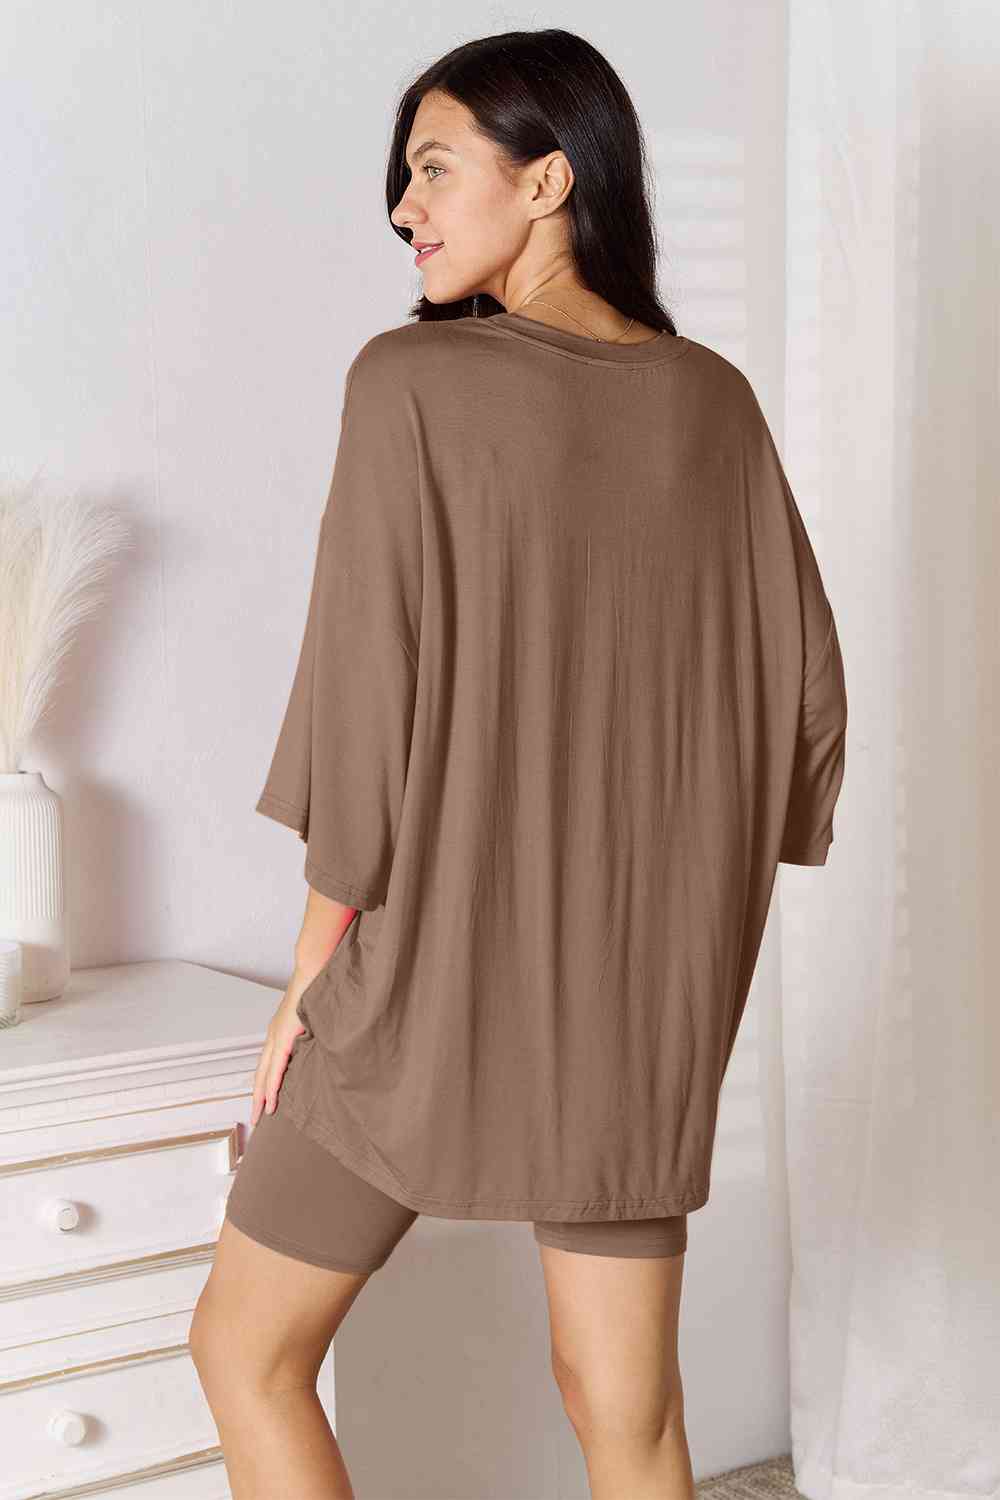 Taupe Brown Soft Top & Shorts Set 